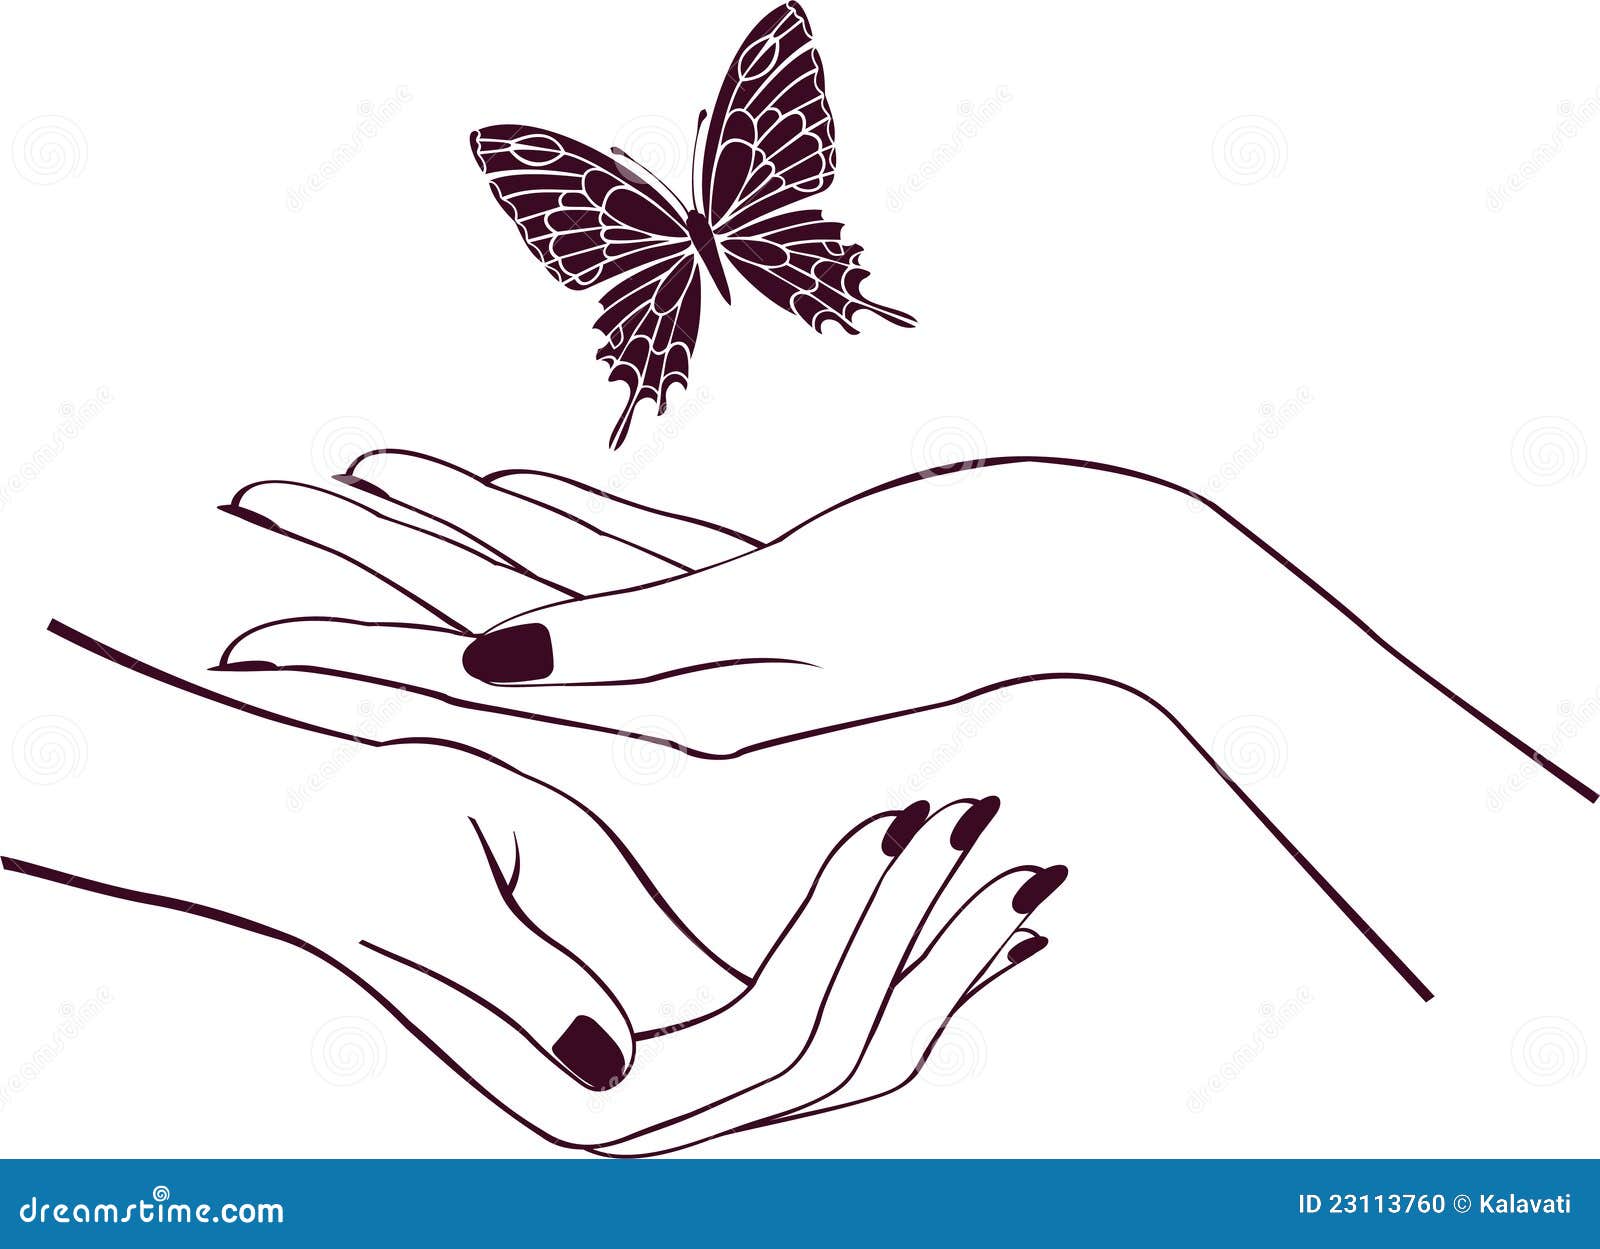 Hands With Butterfly Stock Photo - Image: 23113760